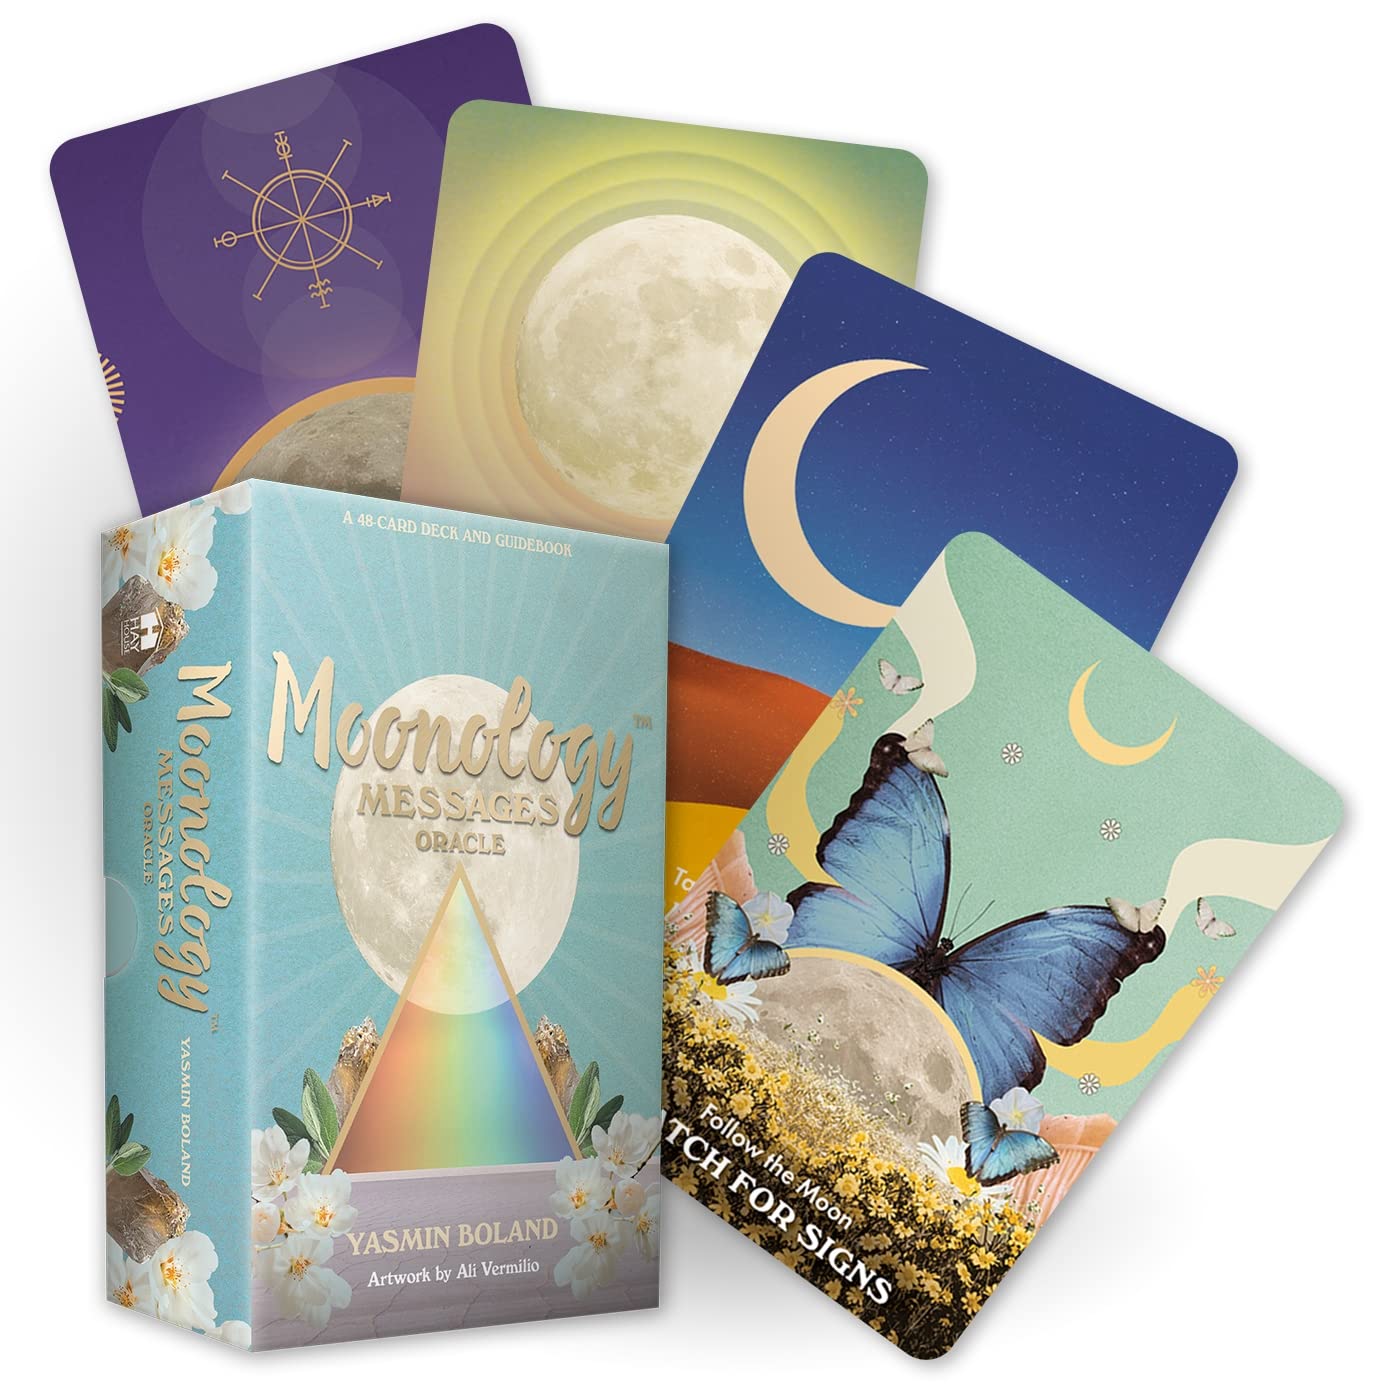 Moonology Messages Oracle - Maya Candle Co